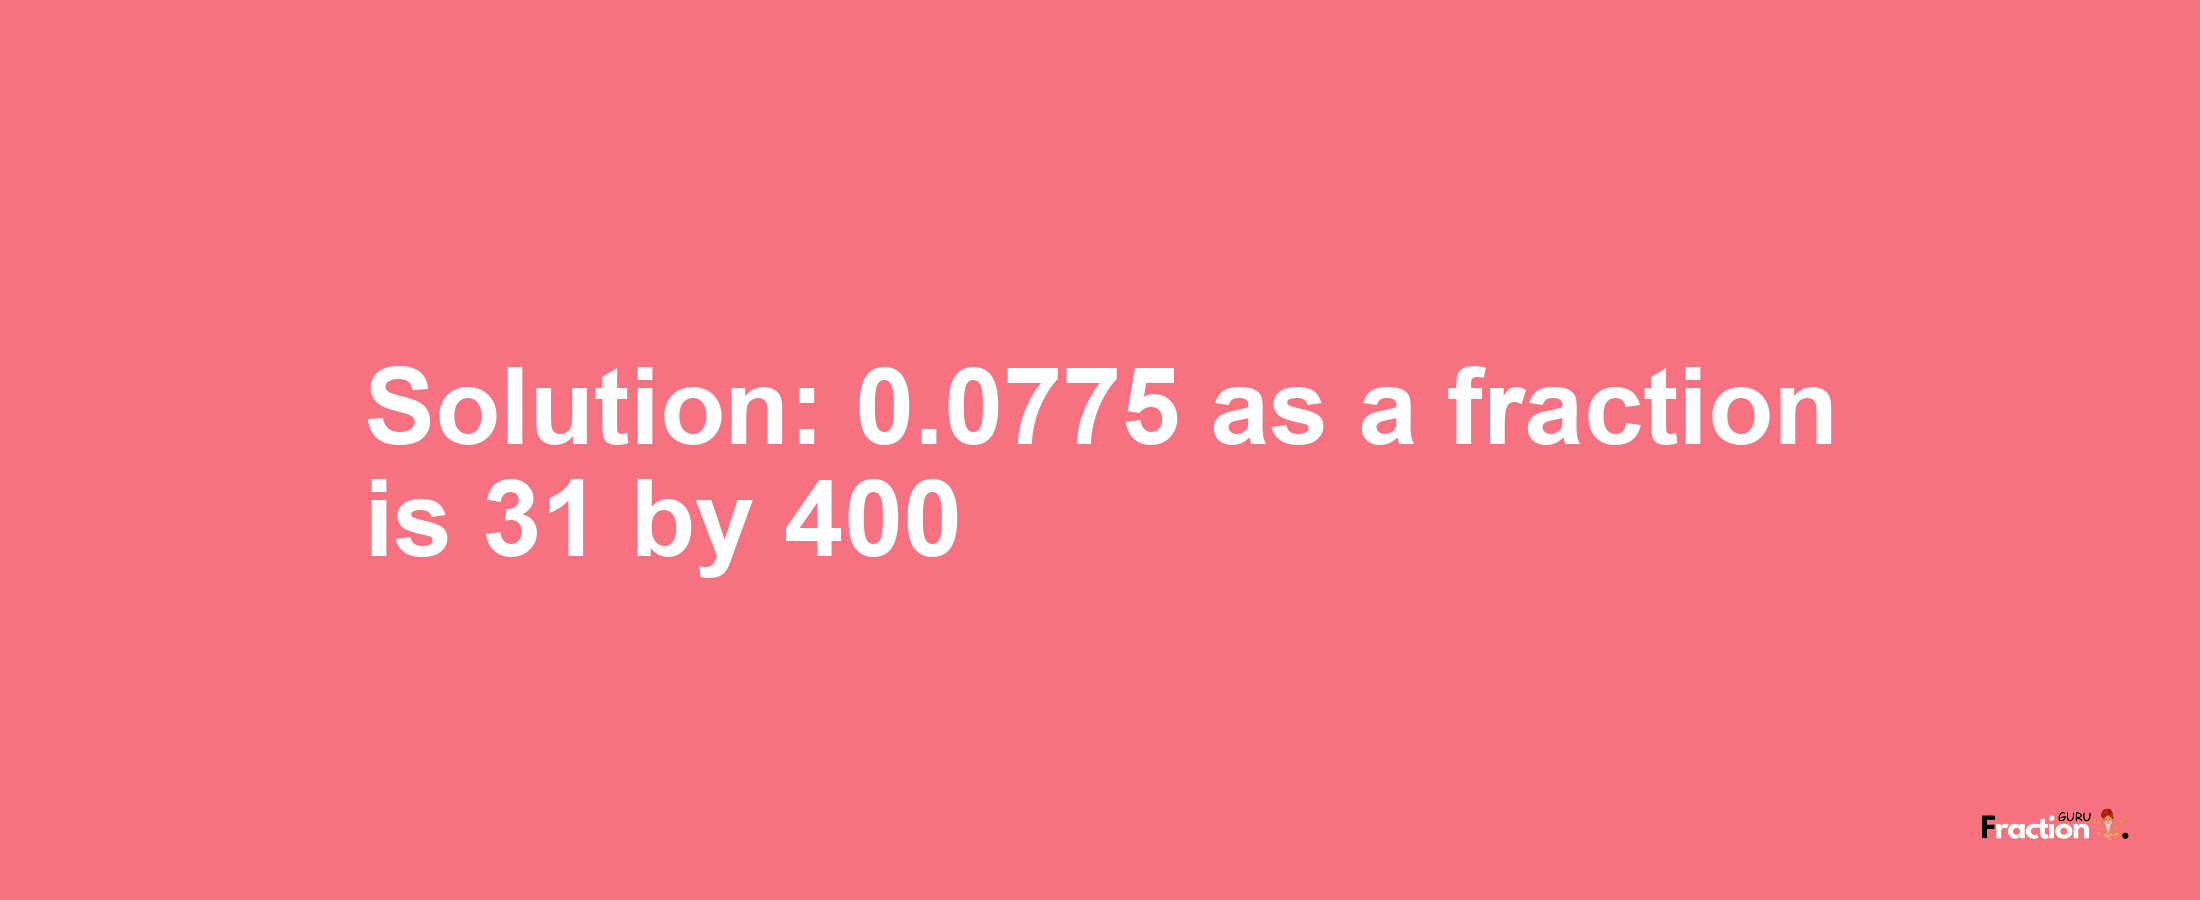 Solution:0.0775 as a fraction is 31/400